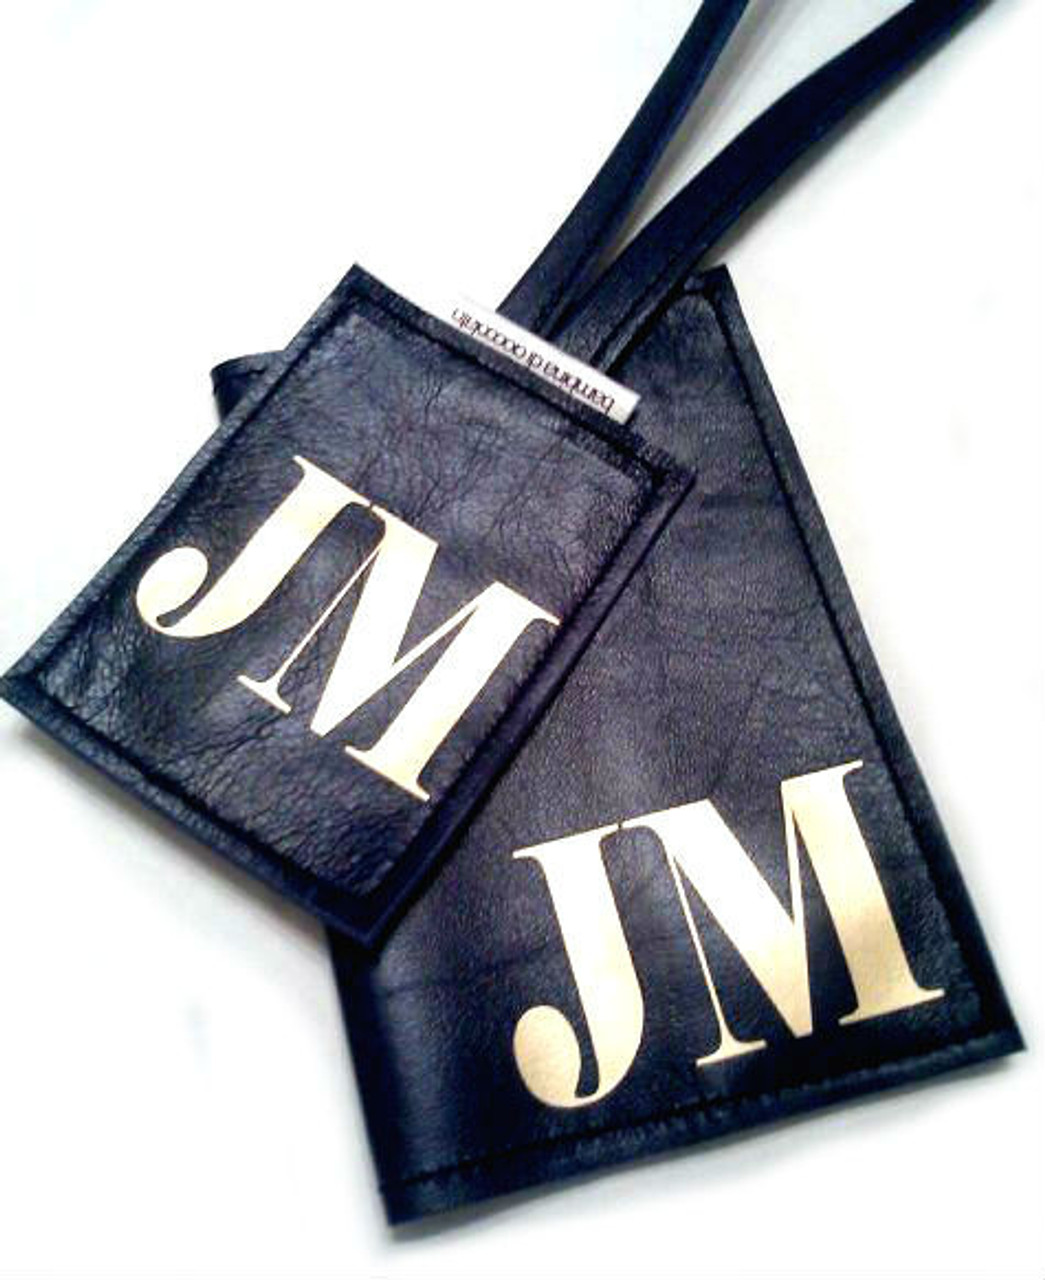 Mia Personalized & Monogrammed Leather Passport Cover Holder